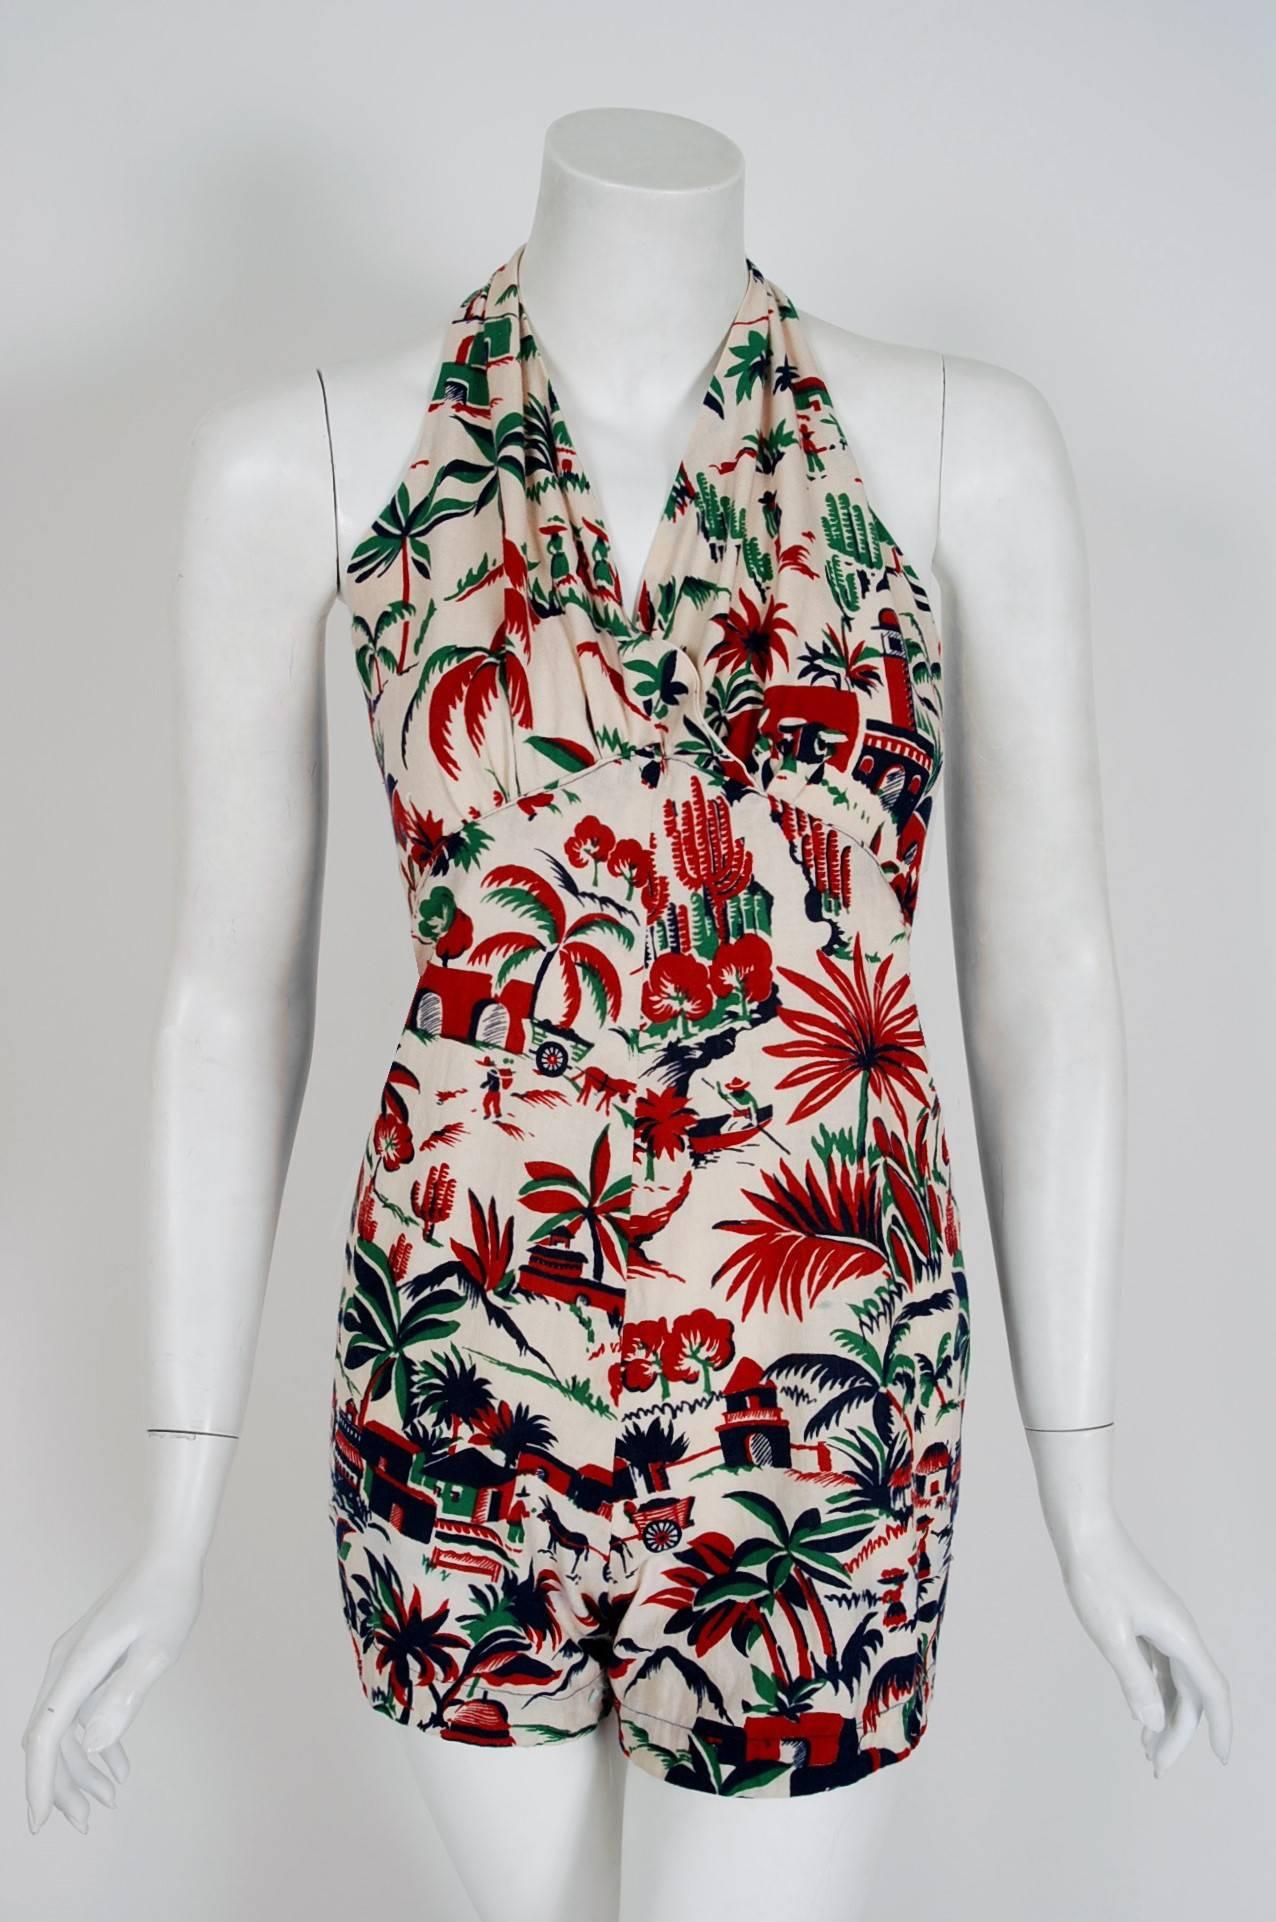 With its colorful Caribbean scenic novelty-print and flawless styling, this playsuit ensemble has the casual elegance the 1940's were known for. The shelf-bust halter bodice is both very flattering and effortless to wear. The hourglass nipped